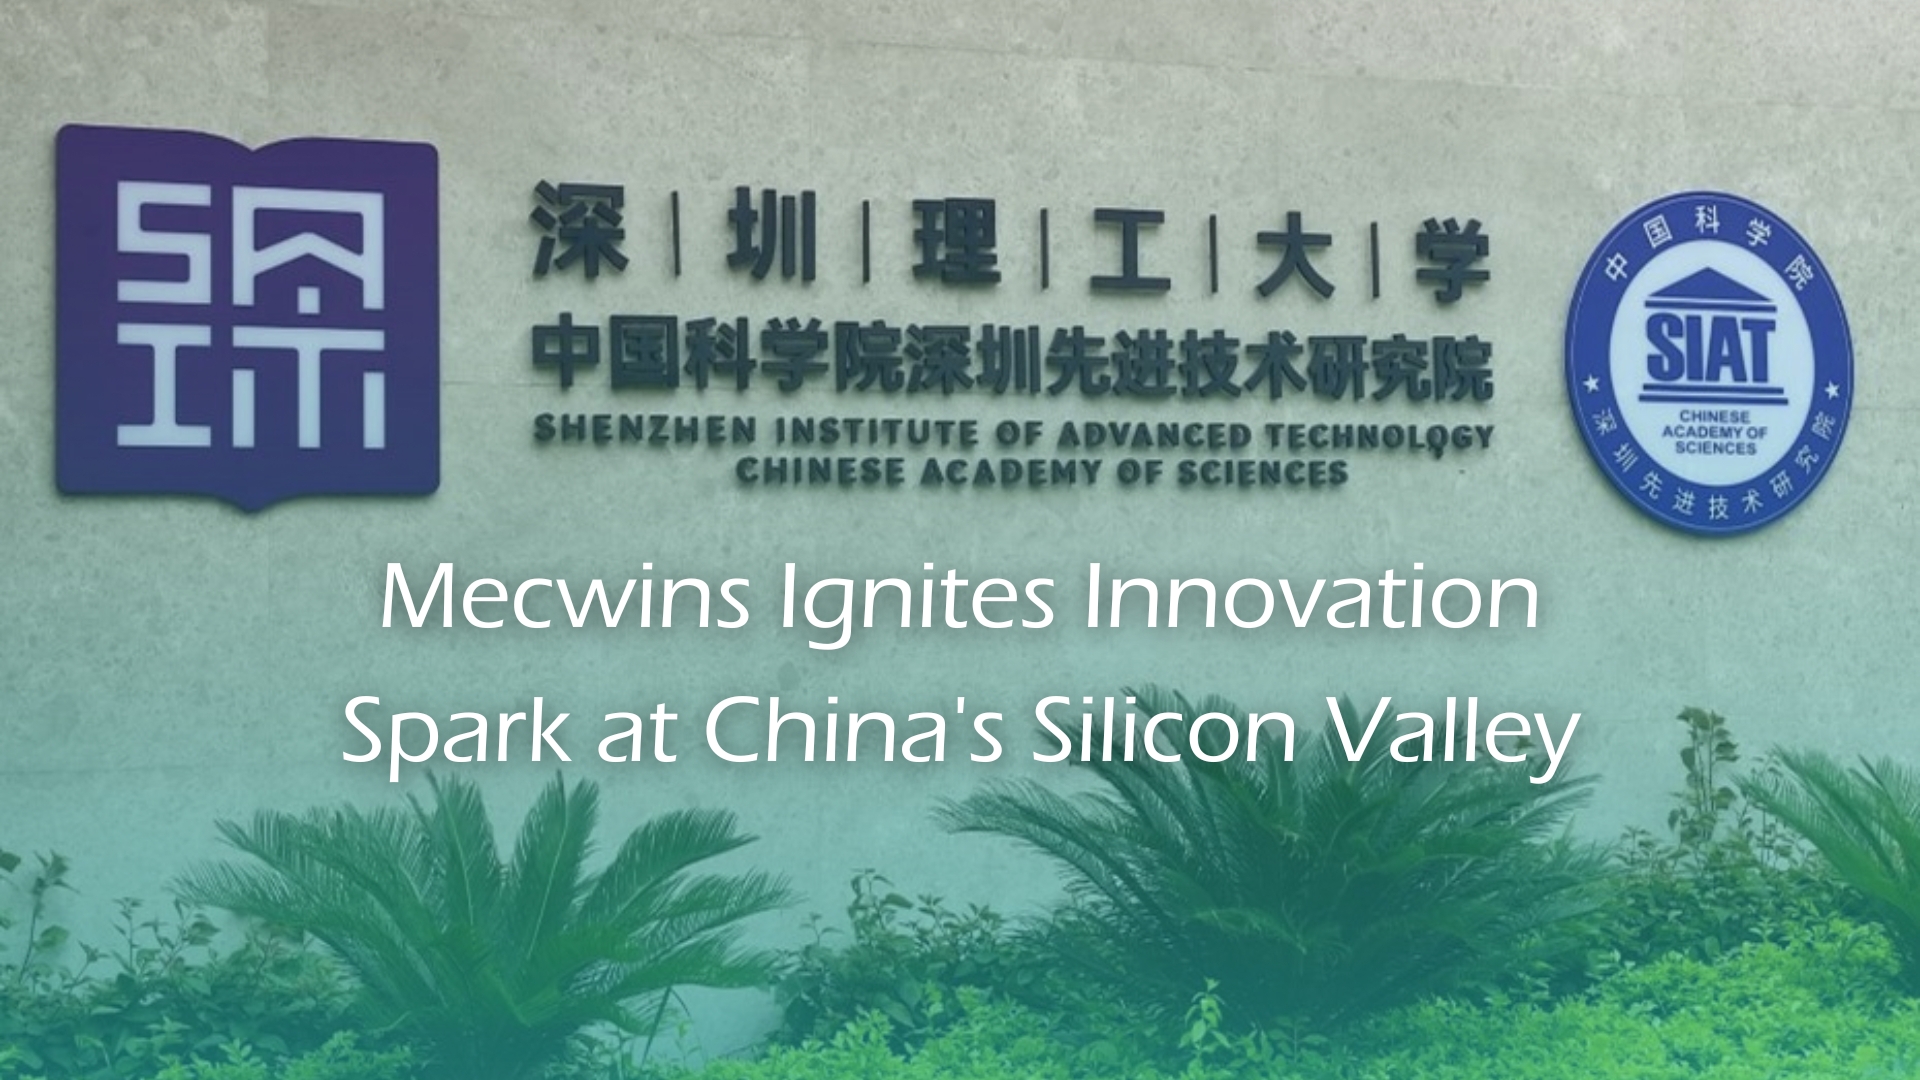 Mecwins Ignites Innovation Spark at China's Silicon Valley